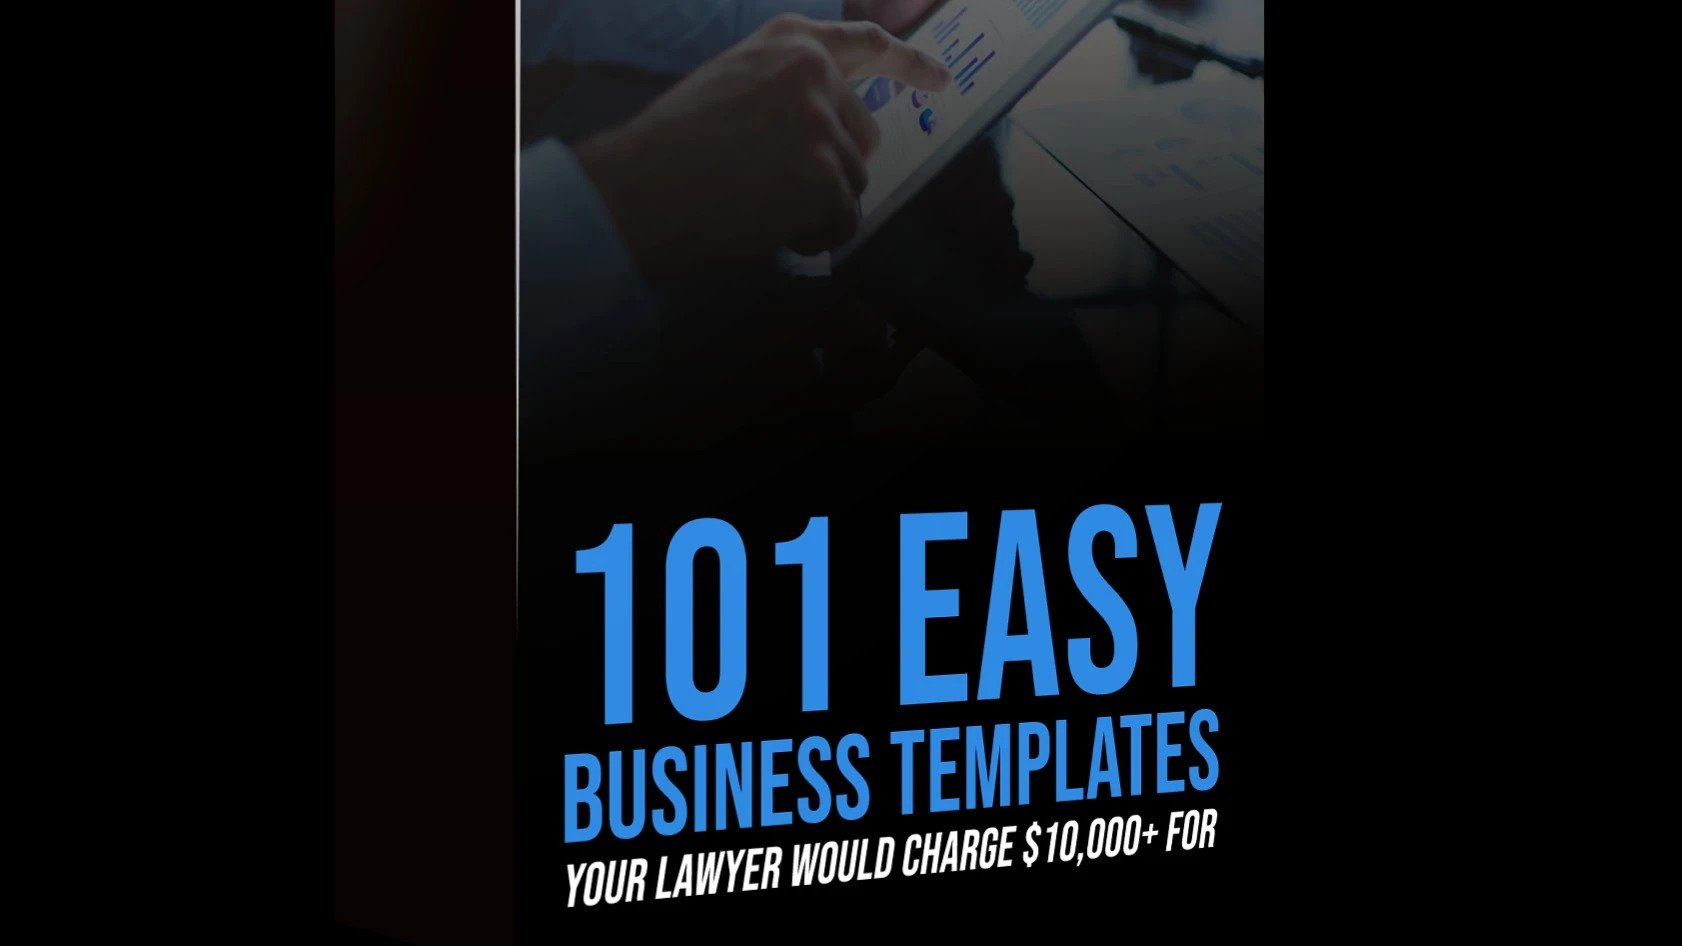 101 Easy Business Templates Your Lawyer Would Charge $10,000+ For